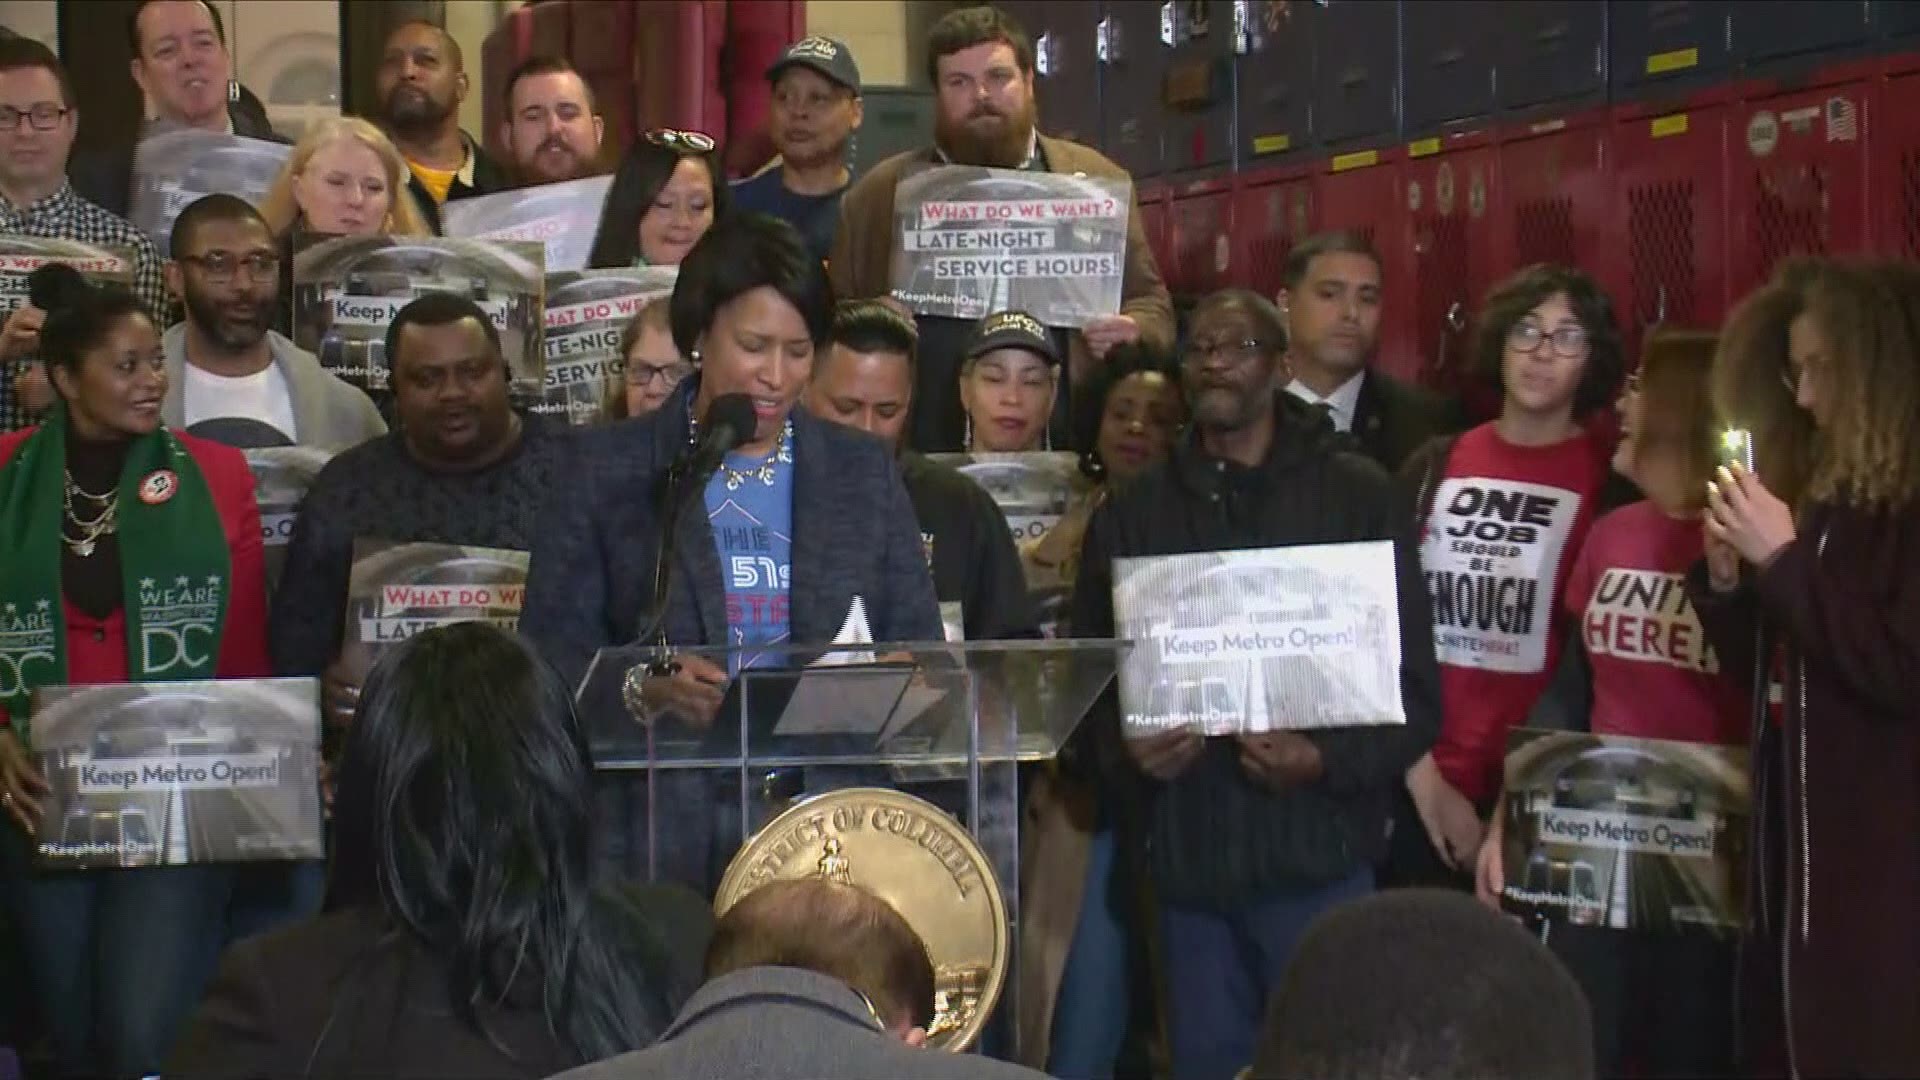 The Mayor of the District hosted a rally proposing that Metro keep hours open later during the week.